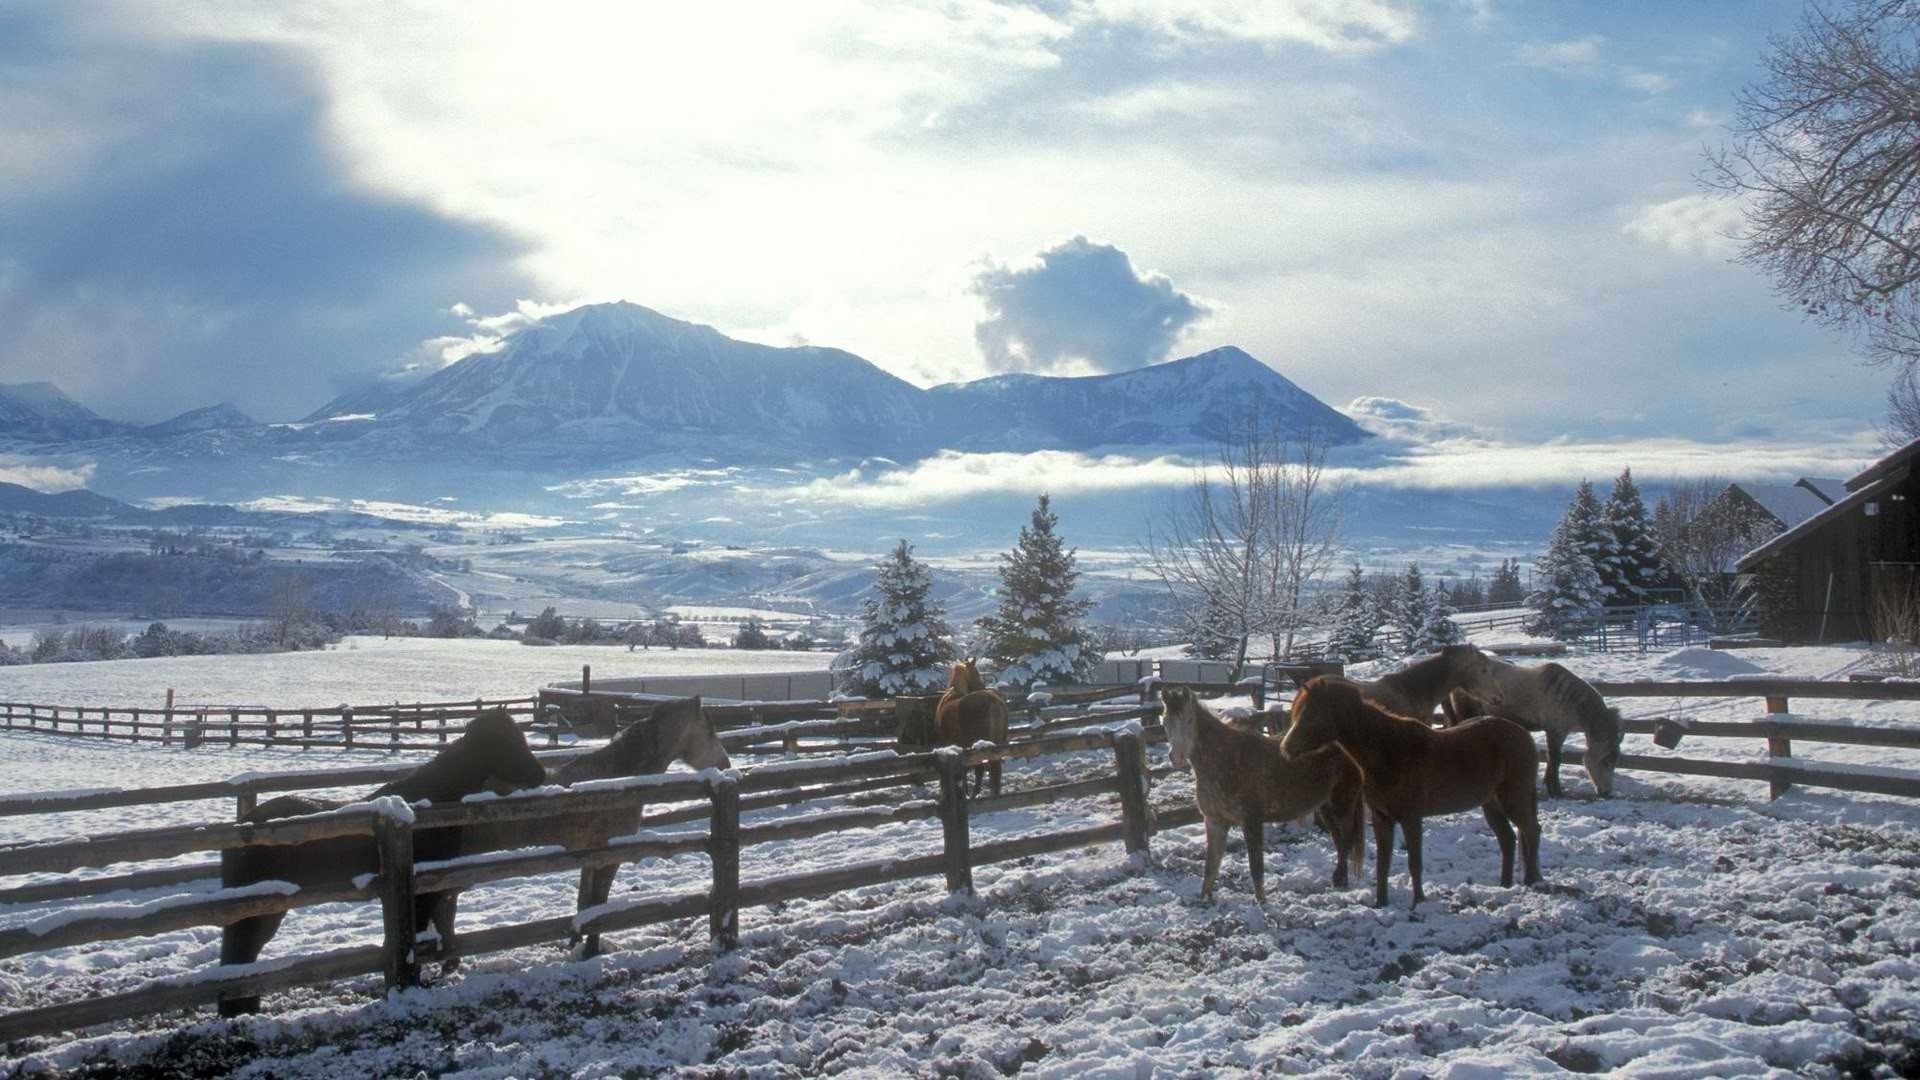 1920x1080 Clouds landscapes nature winter snow trees skylines fences country horses  horse fence wallpaper |  | 80479 | WallpaperUP